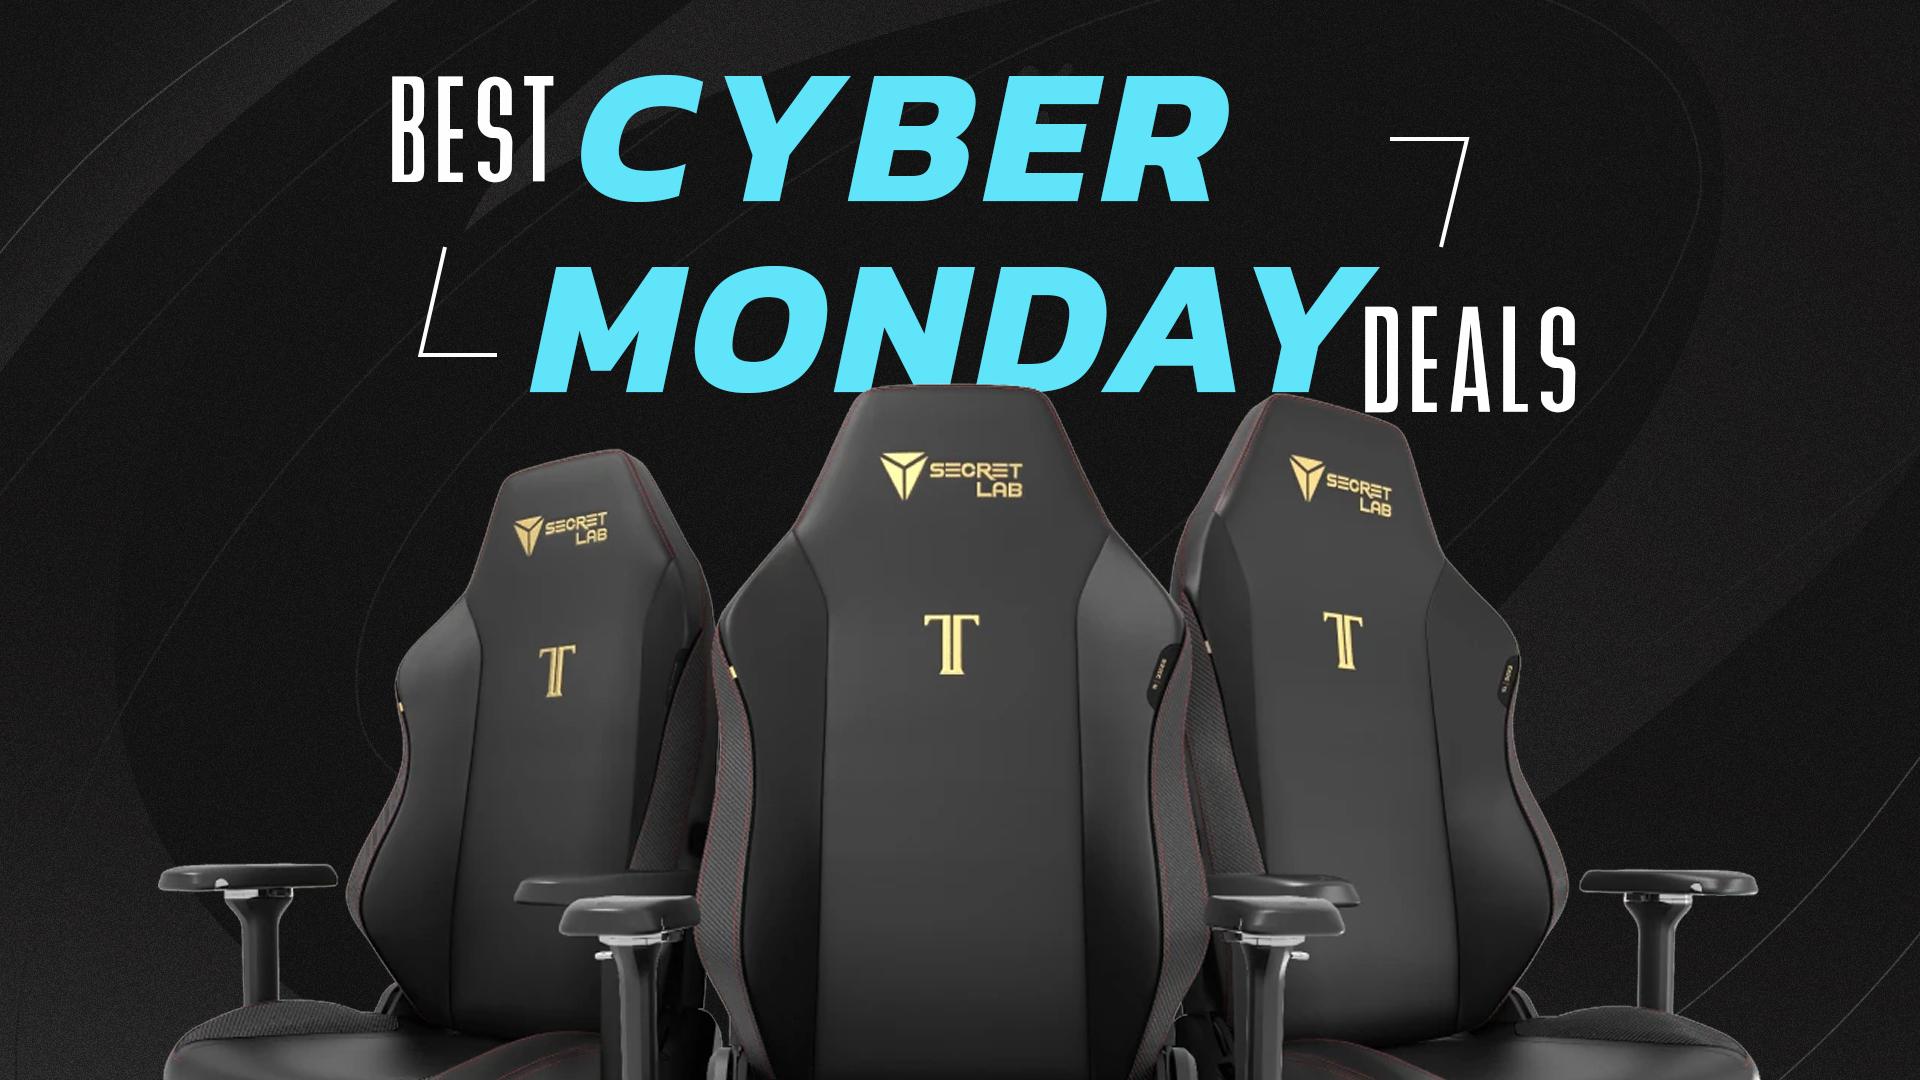 The Secretlab Holiday Sale: Up to $150 Off Our Favorite Gaming